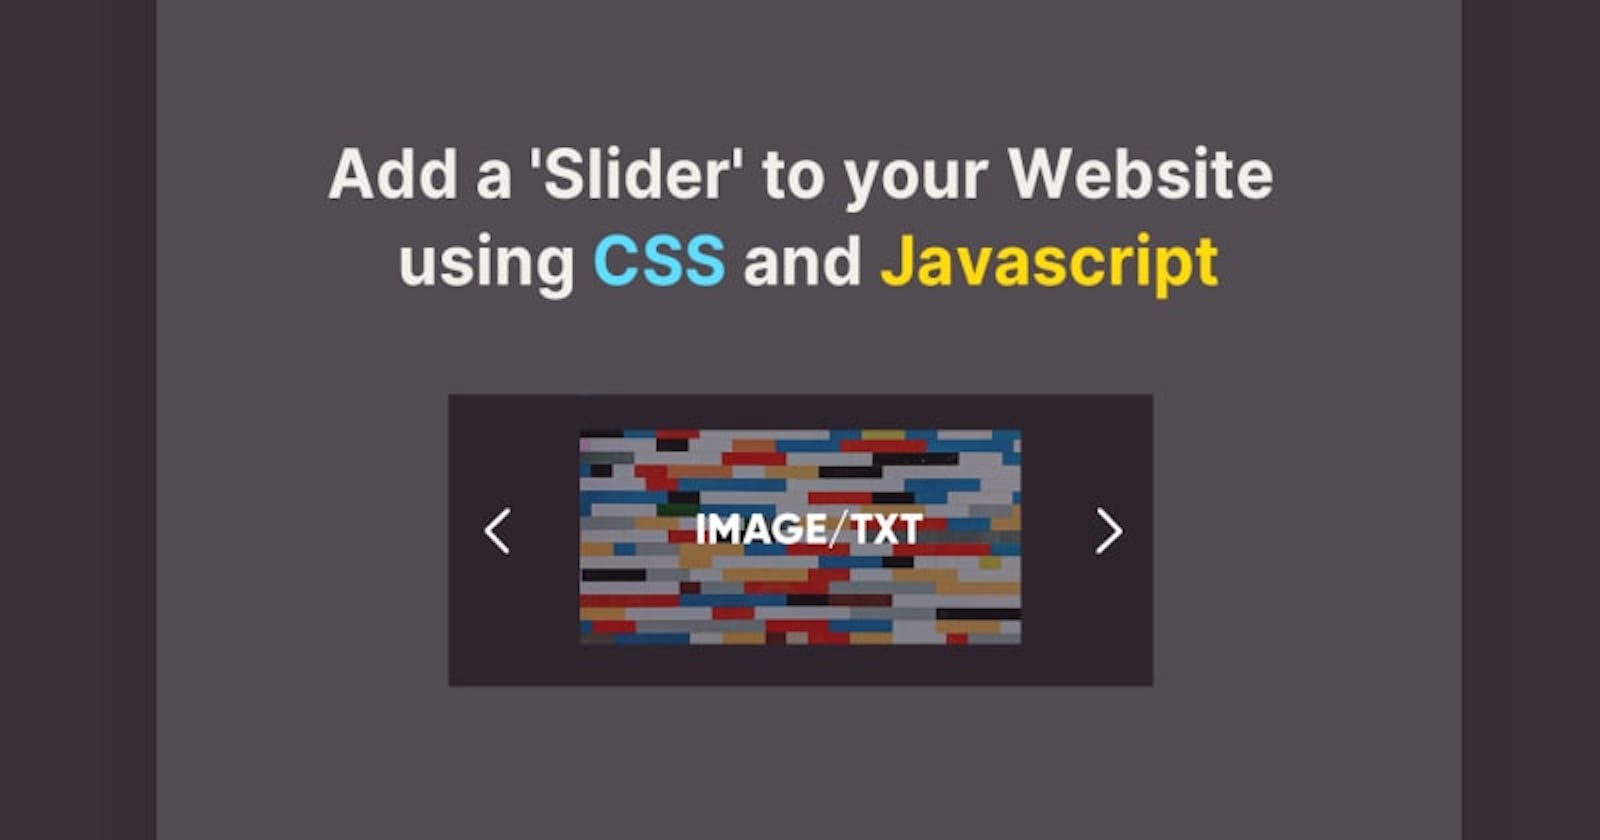 Add a 'Slider' to your Website using CSS and Javascript